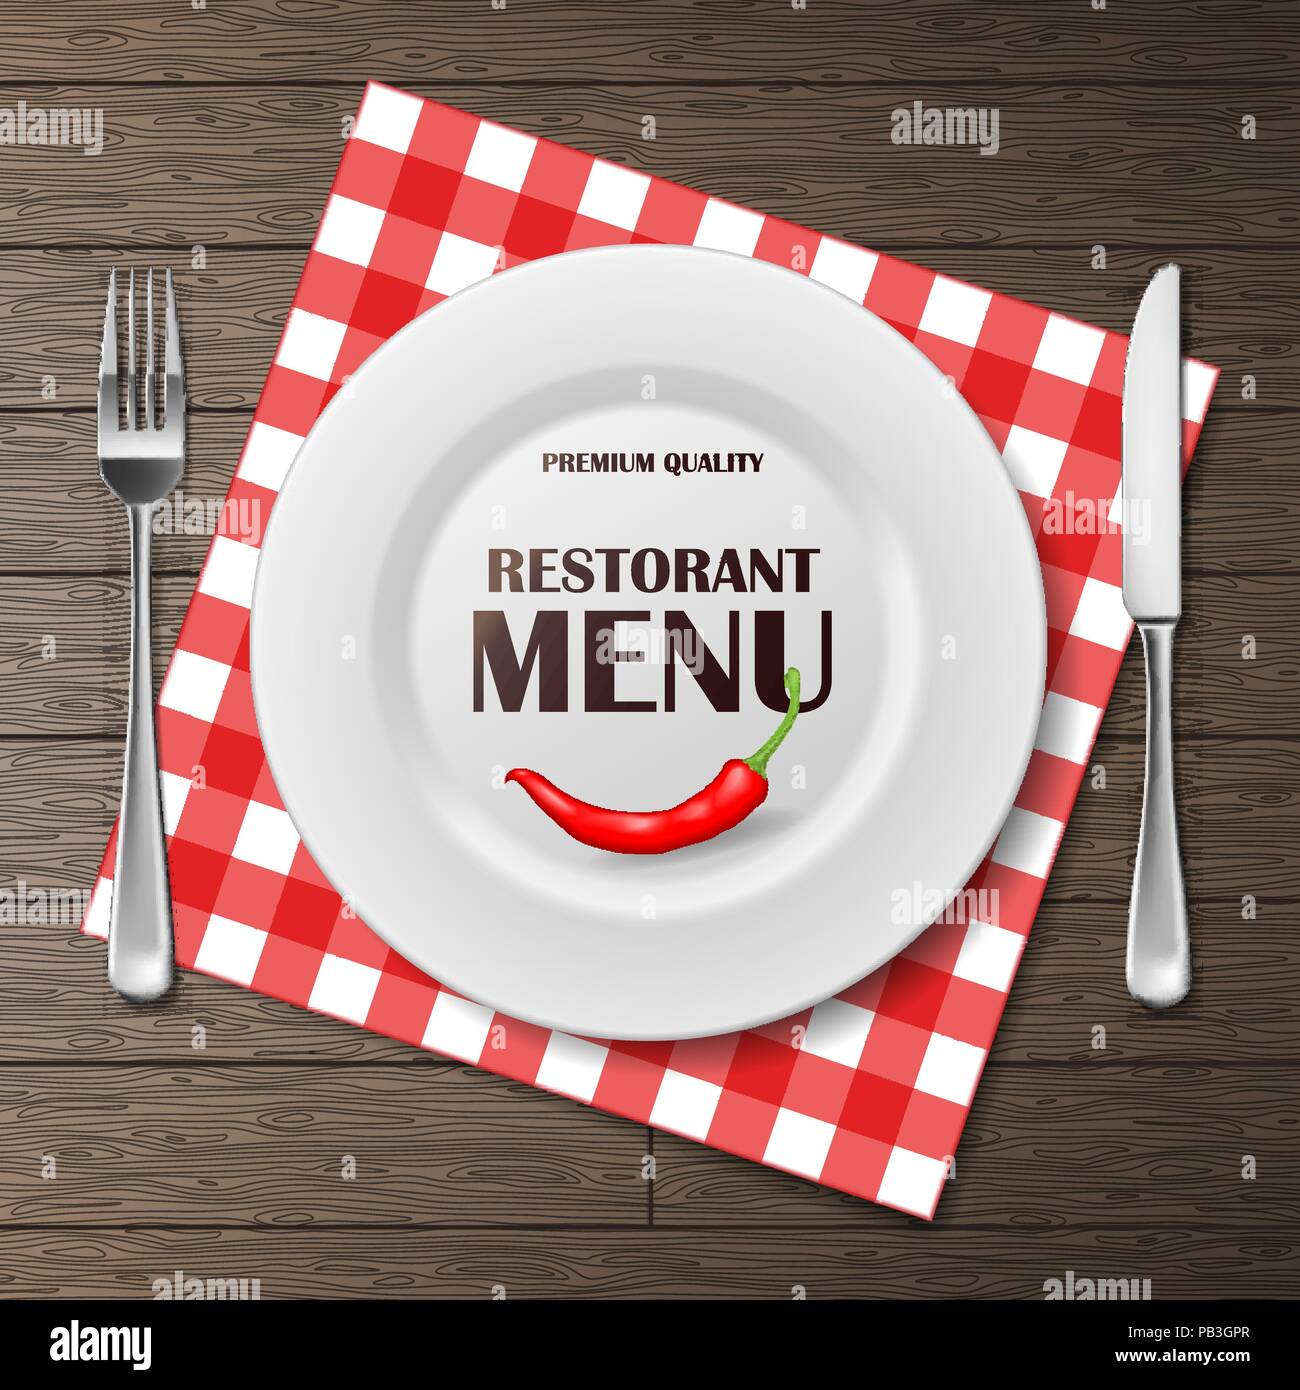 Restaurant menu front banner with plate and cutlery set on napkin. realistic Restaurant menu background advertisement poster vector illustration Stock Vector